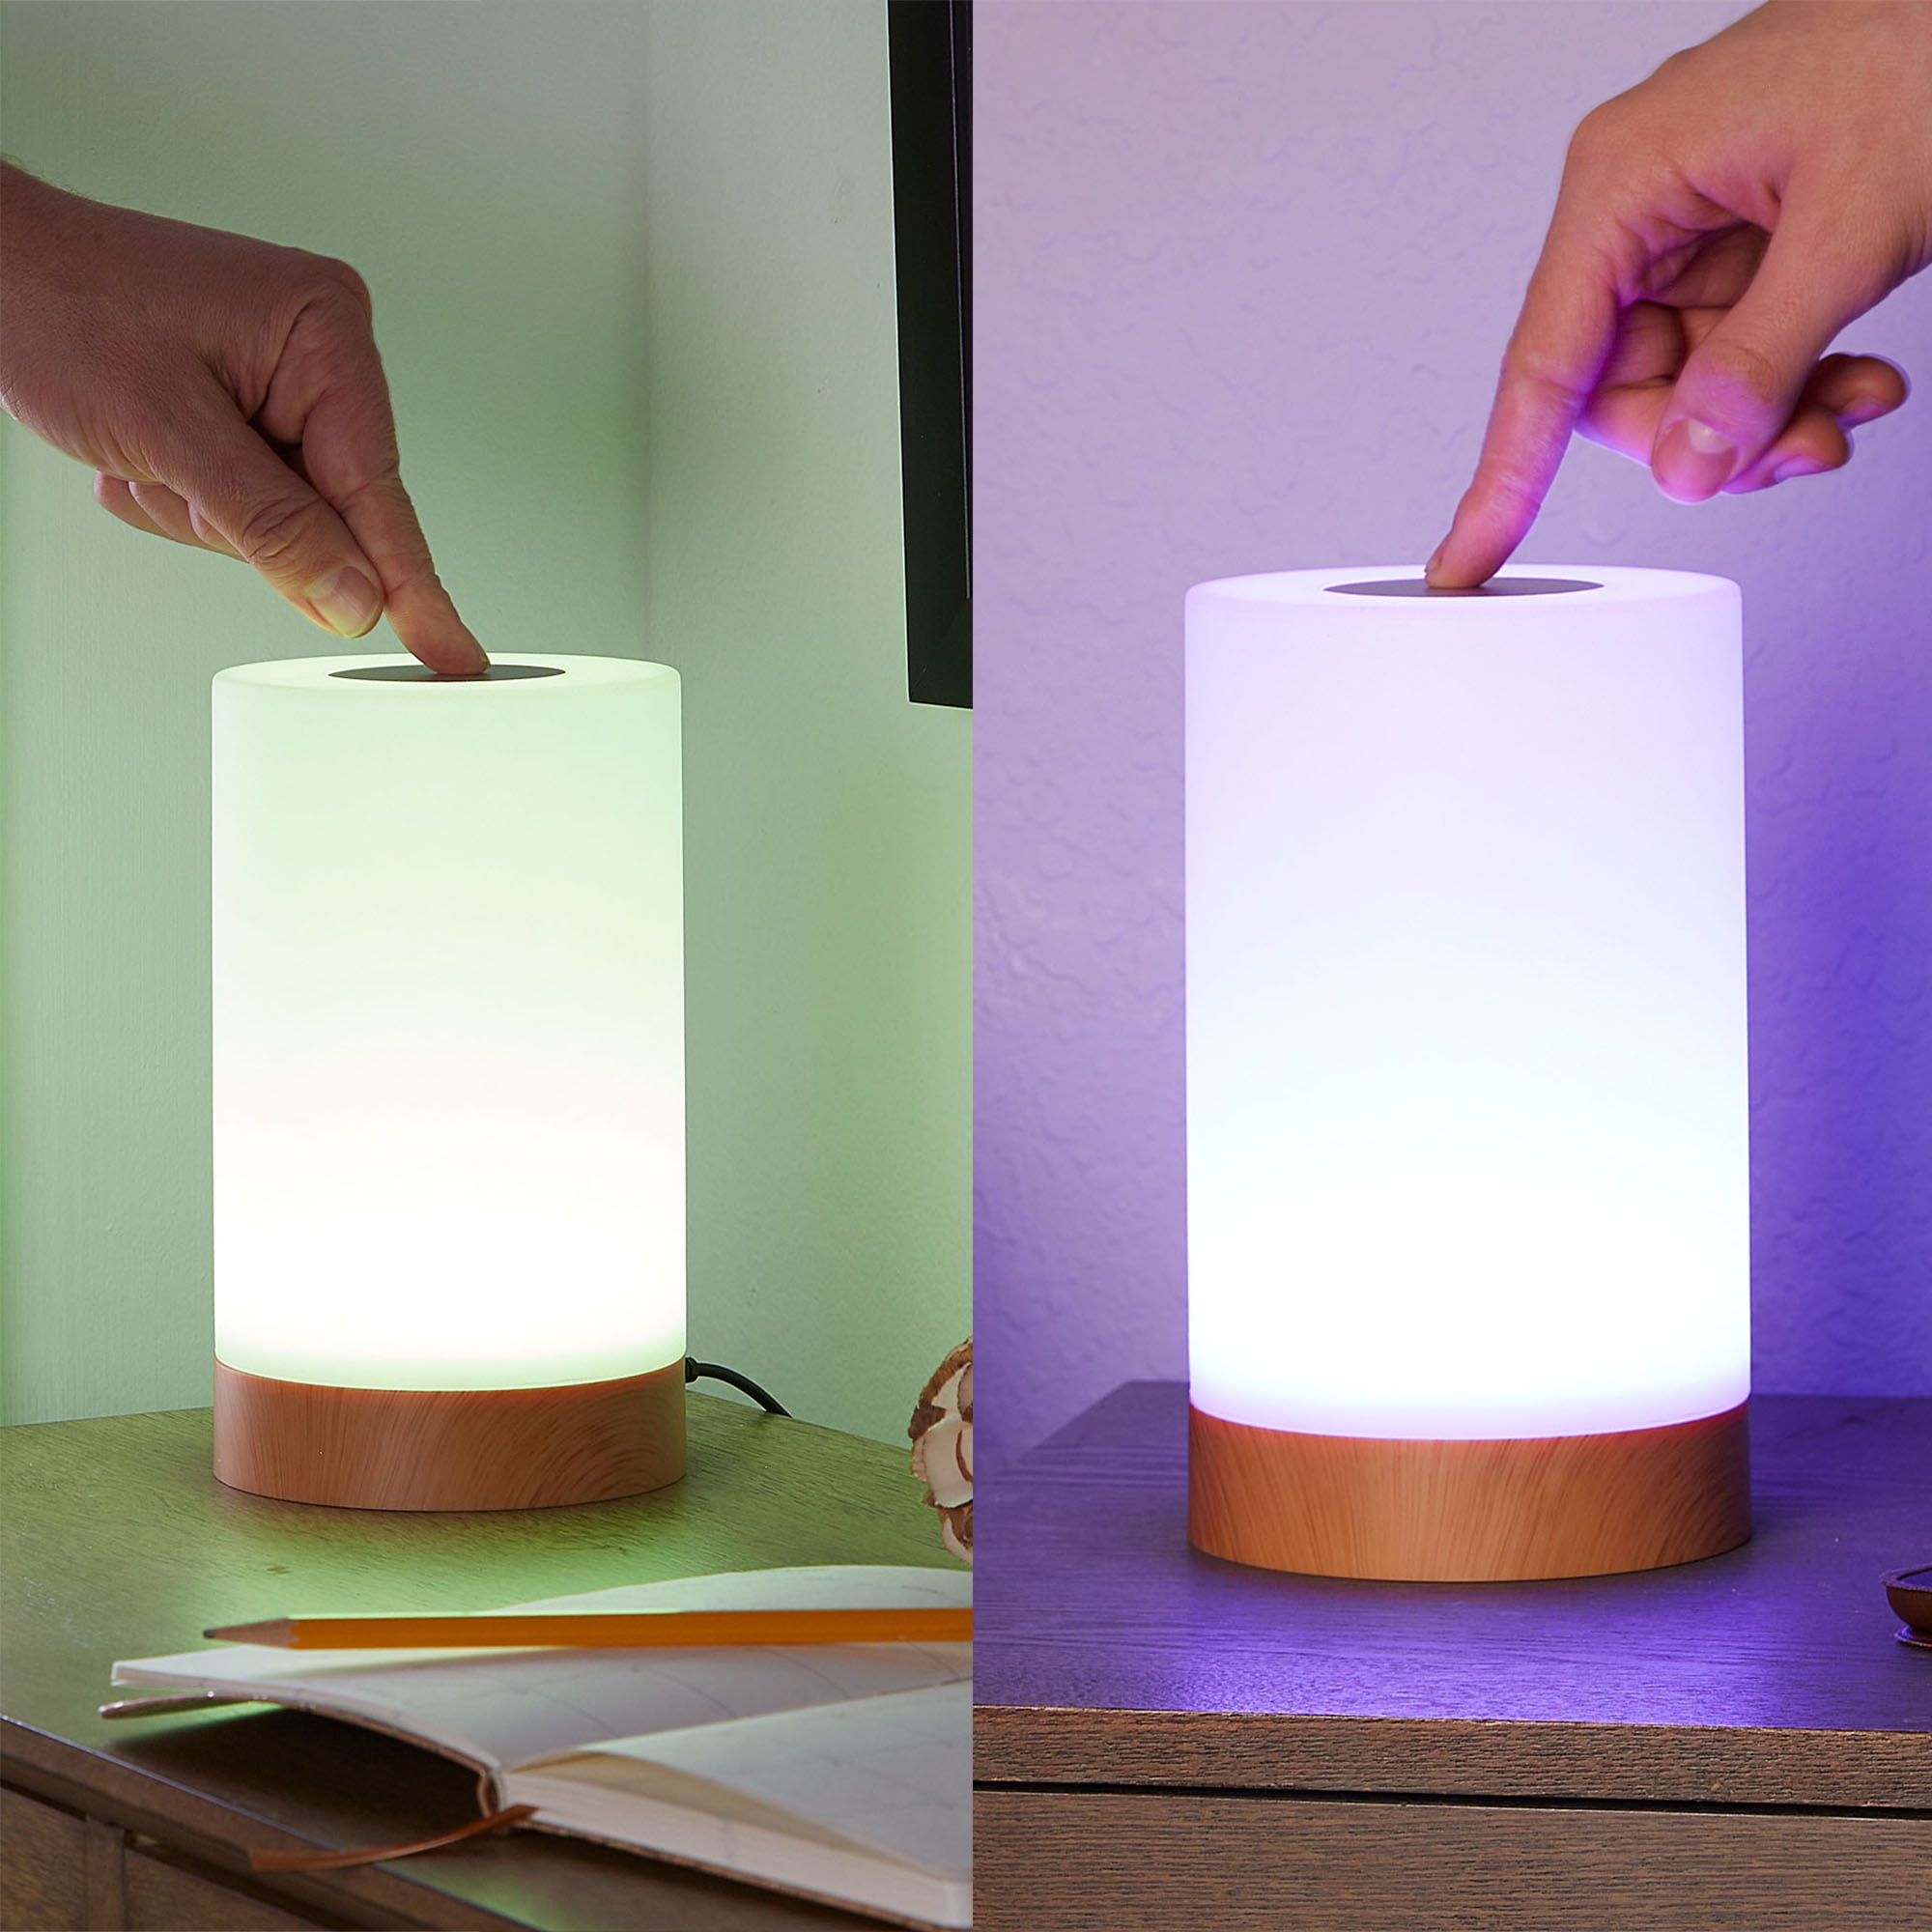 NBG Friendship LED Color Changing Table Lamp with AC Touch Control Wifi Synchronize Light Set - Walmart.com